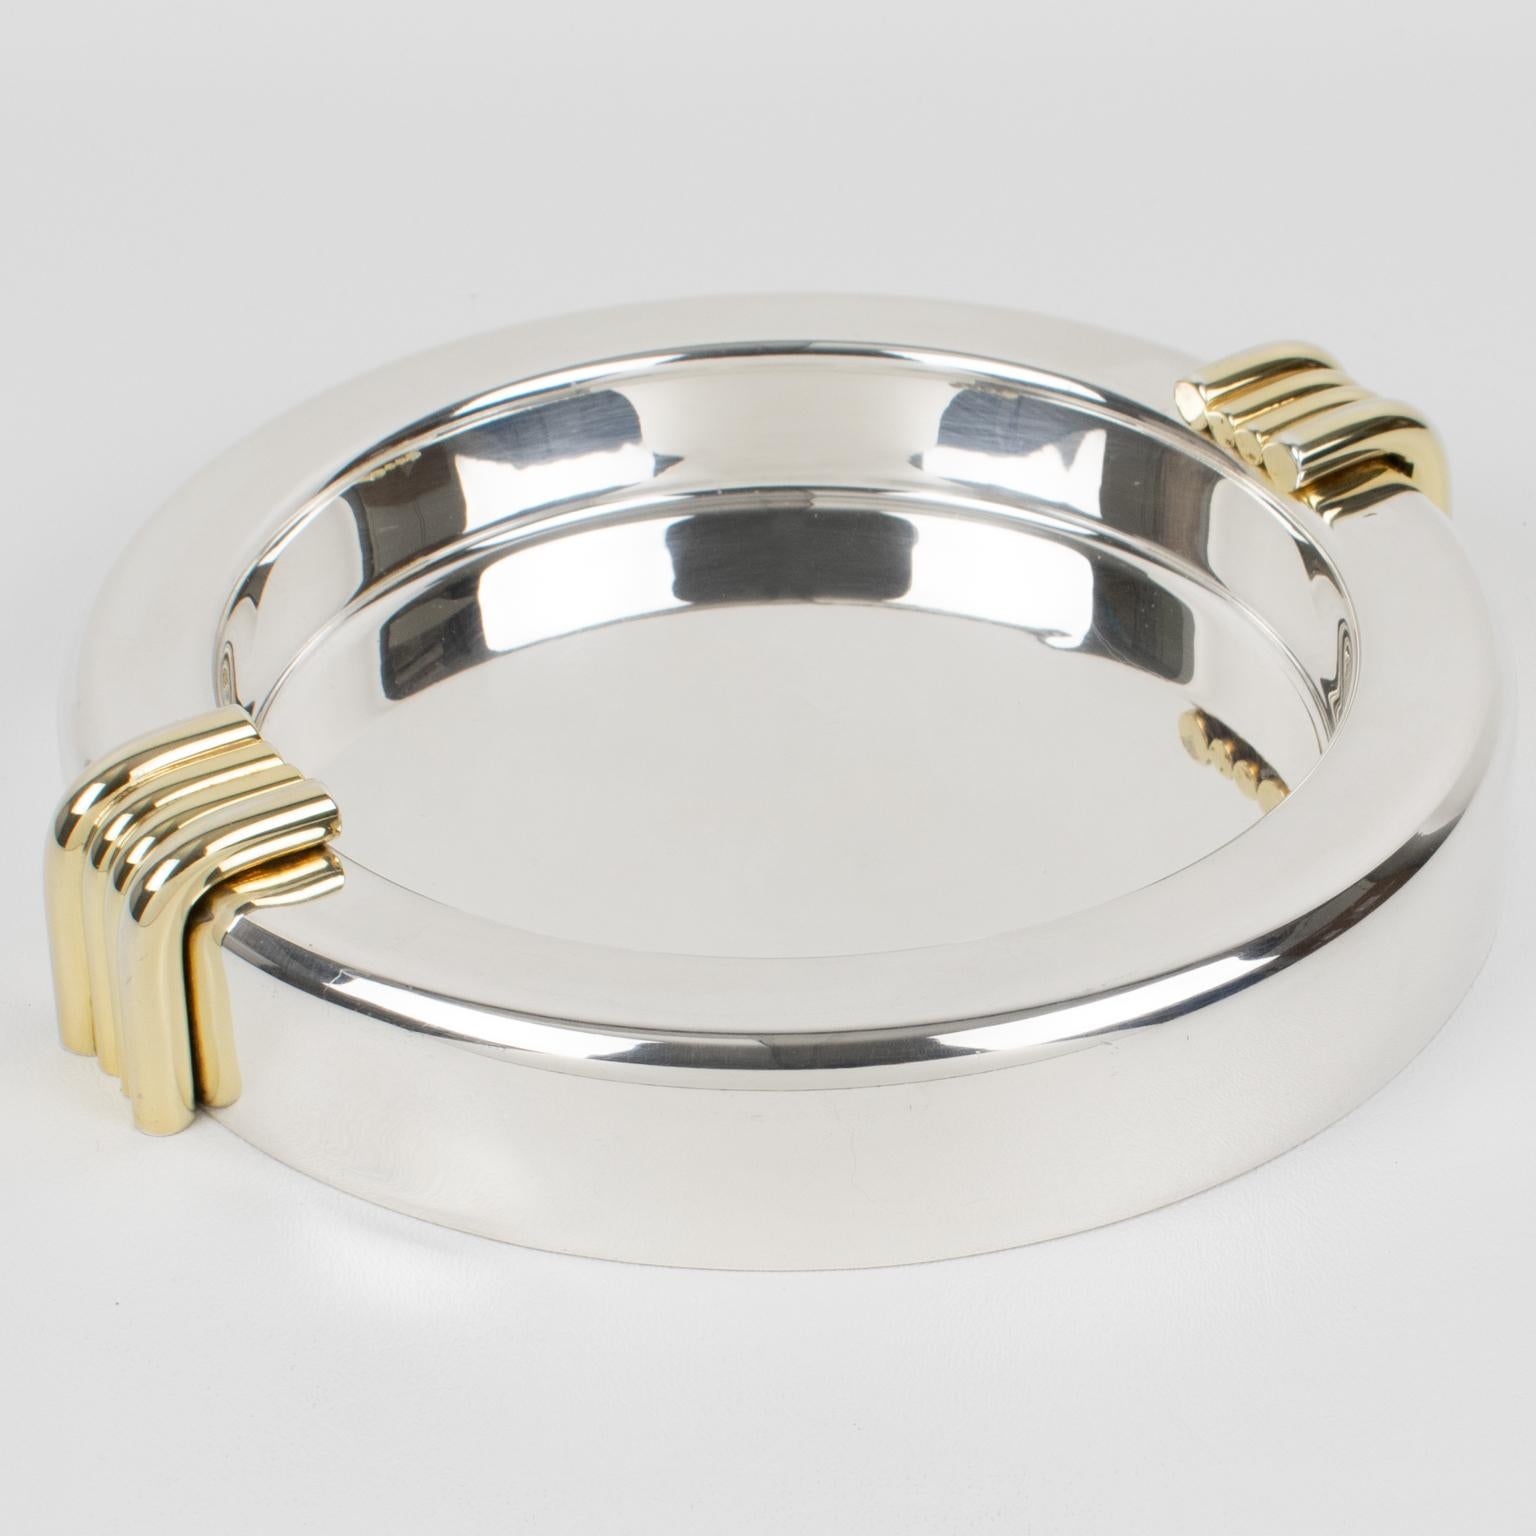 This elegant Christian Dior, Paris modernist large cigar ashtray or vide poche was crafted in France in the 1970s. This sophisticated silver plate catchall features an iconic streamlined design with clean lines and 24k gold-plated decorative raised